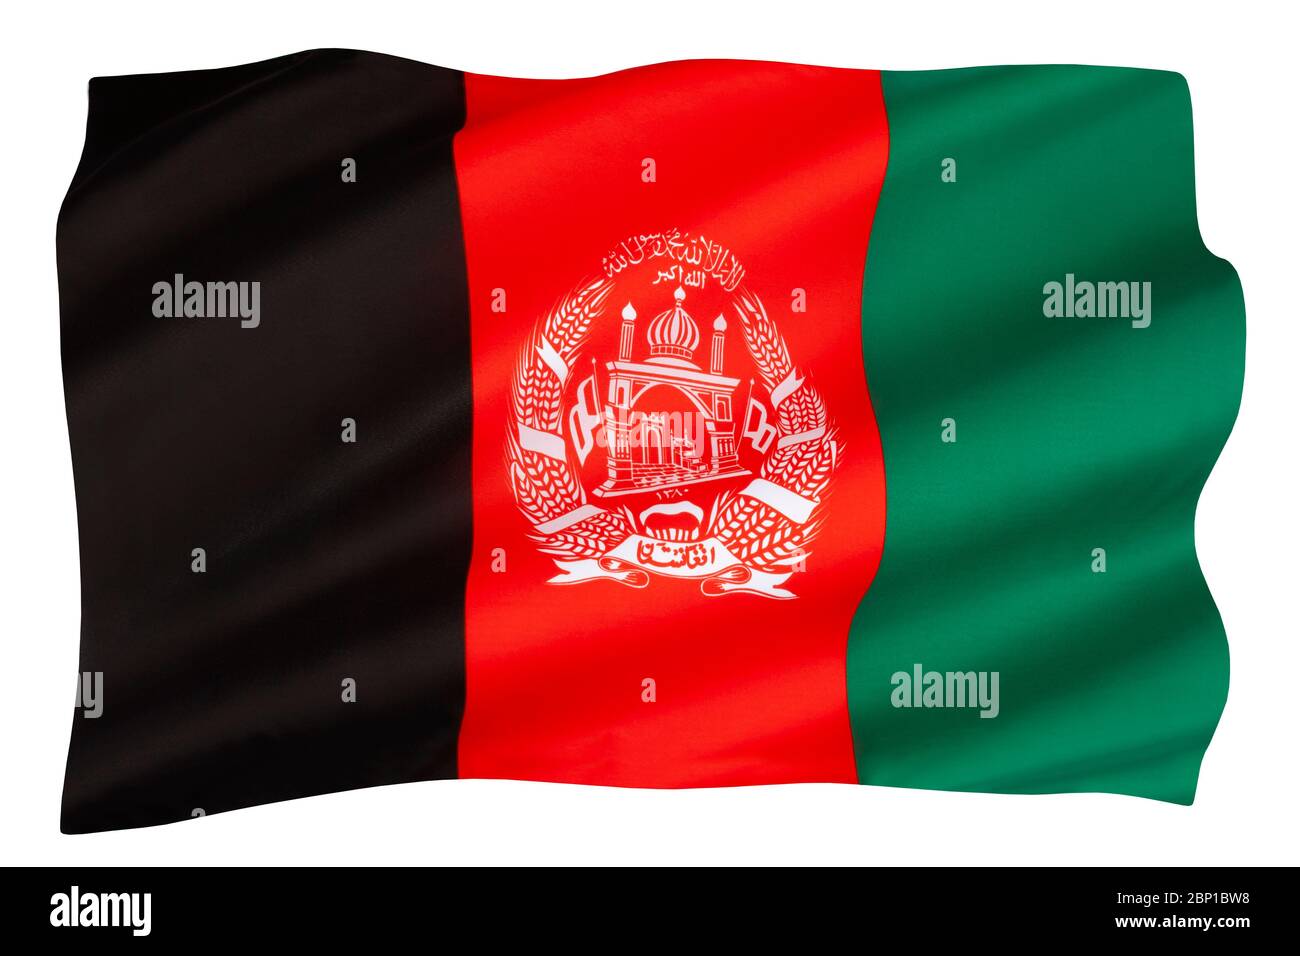 The national flag of Afghanistan - During the 20th century Afghanistan went through 18 different national flags, more than any other country during th Stock Photo